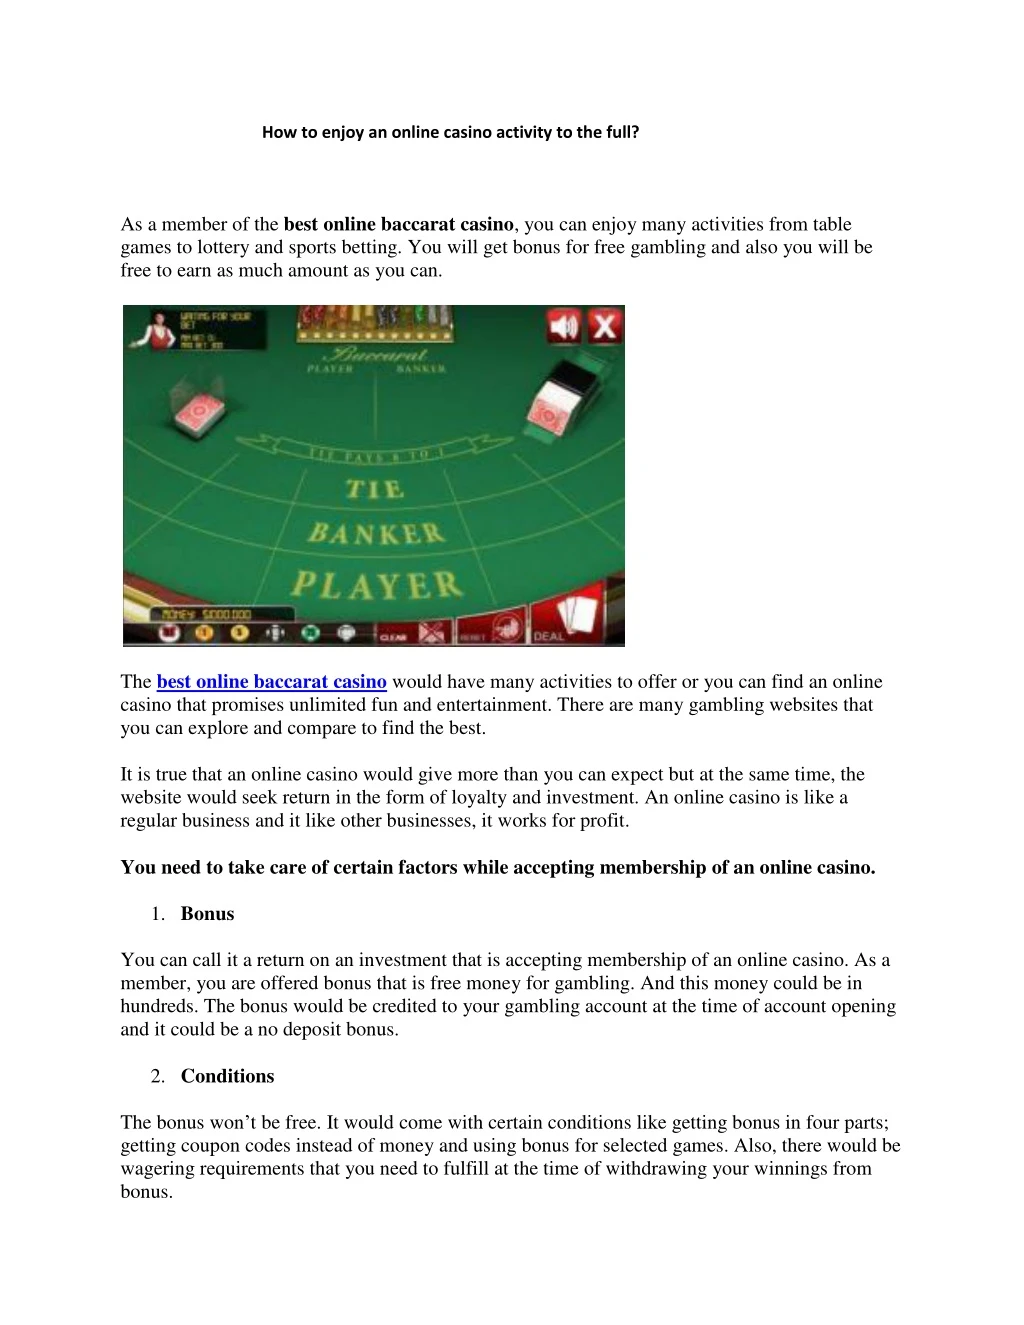 how to enjoy an online casino activity to the full